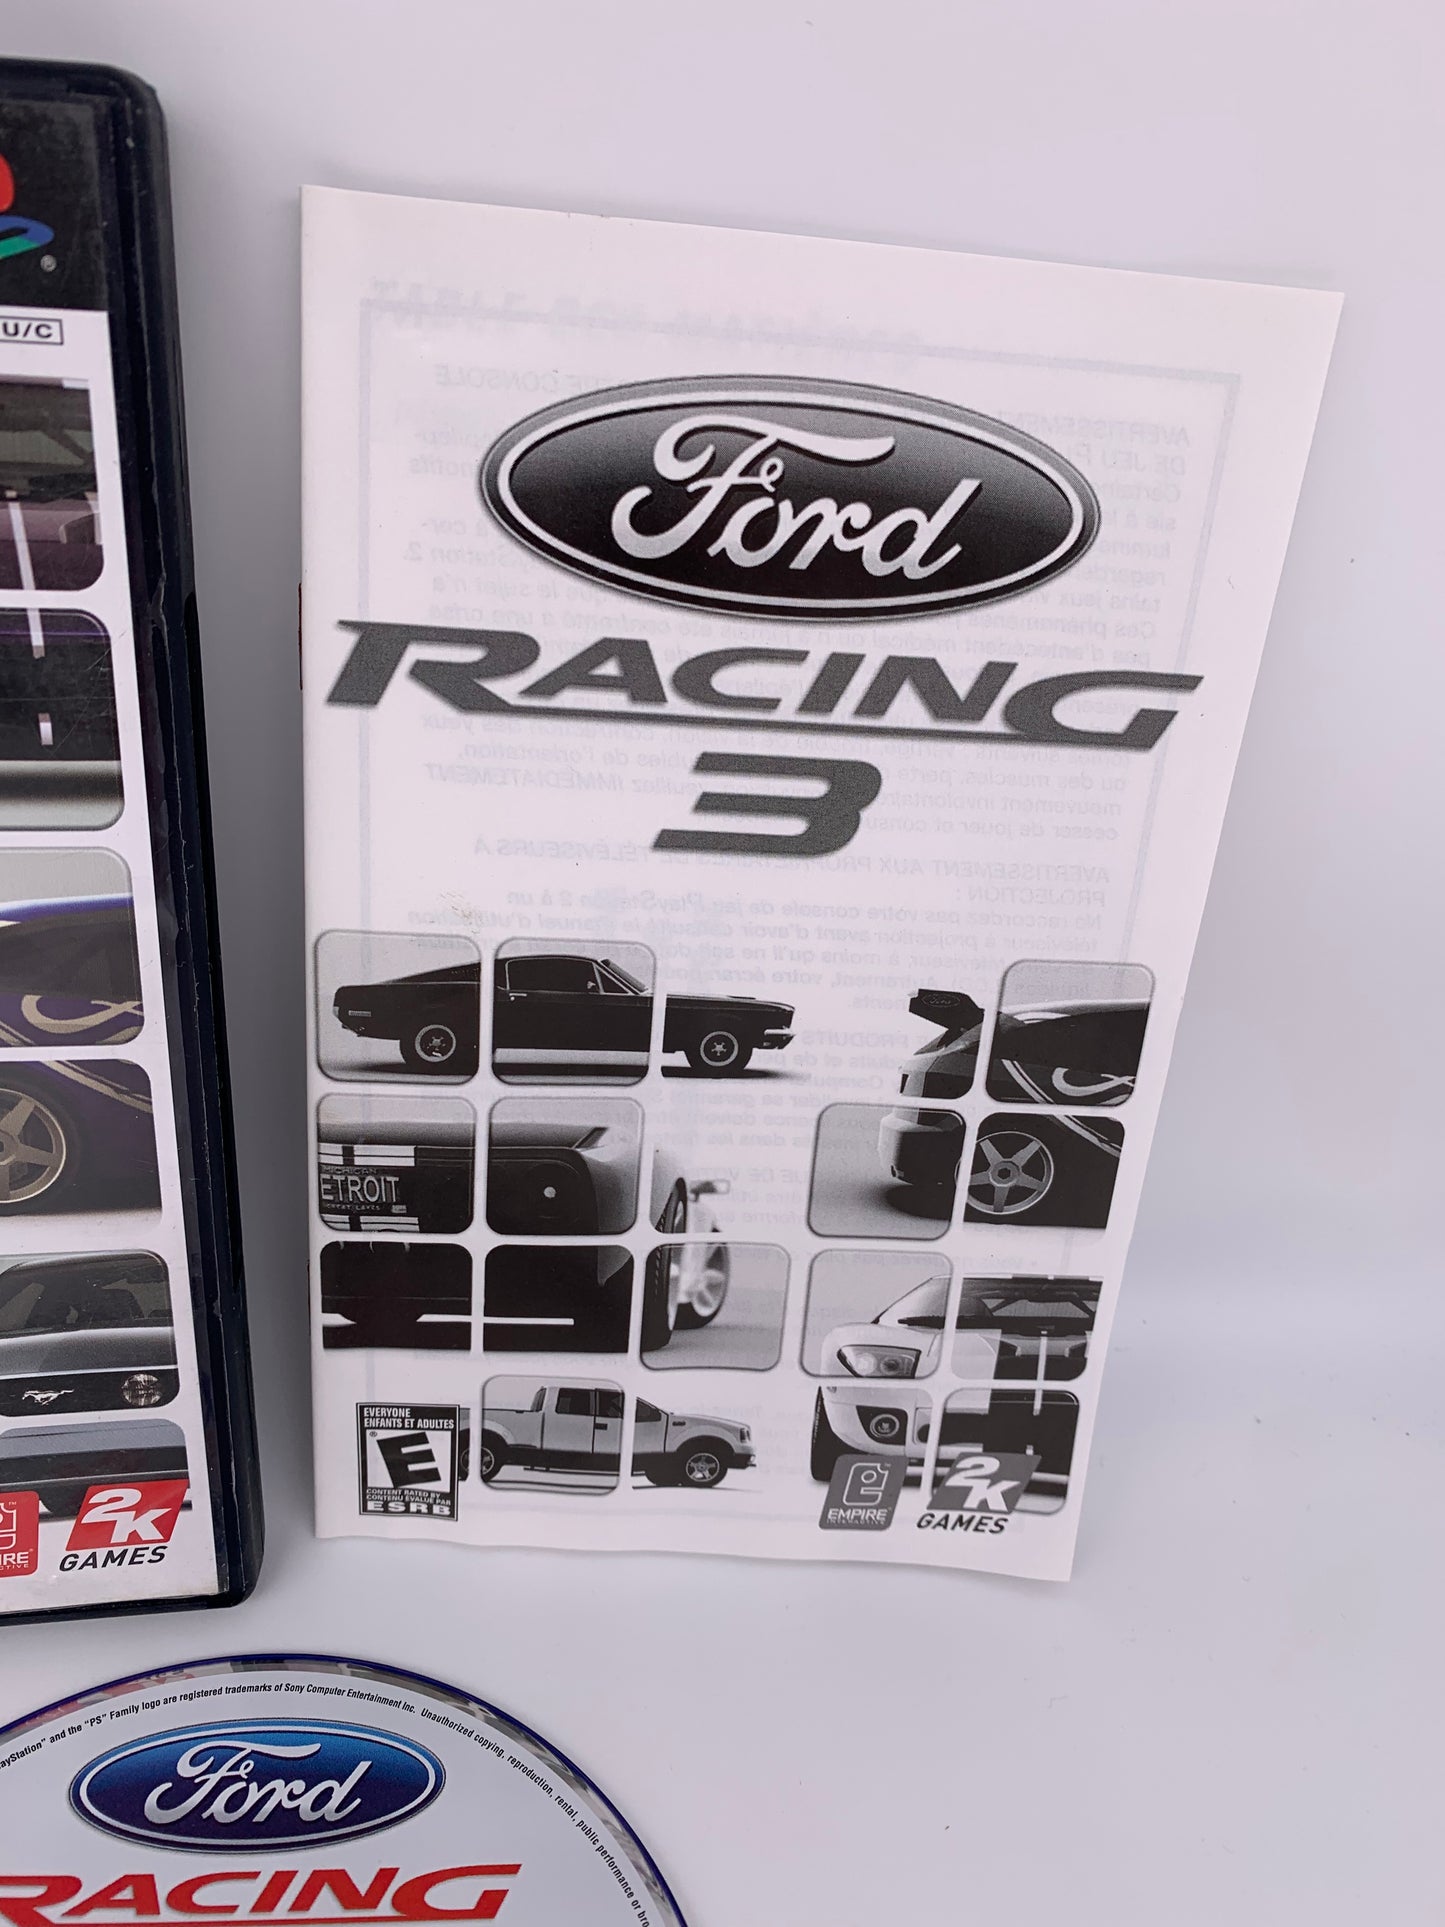 SONY PLAYSTATiON 2 [PS2] | FORD RACiNG 3